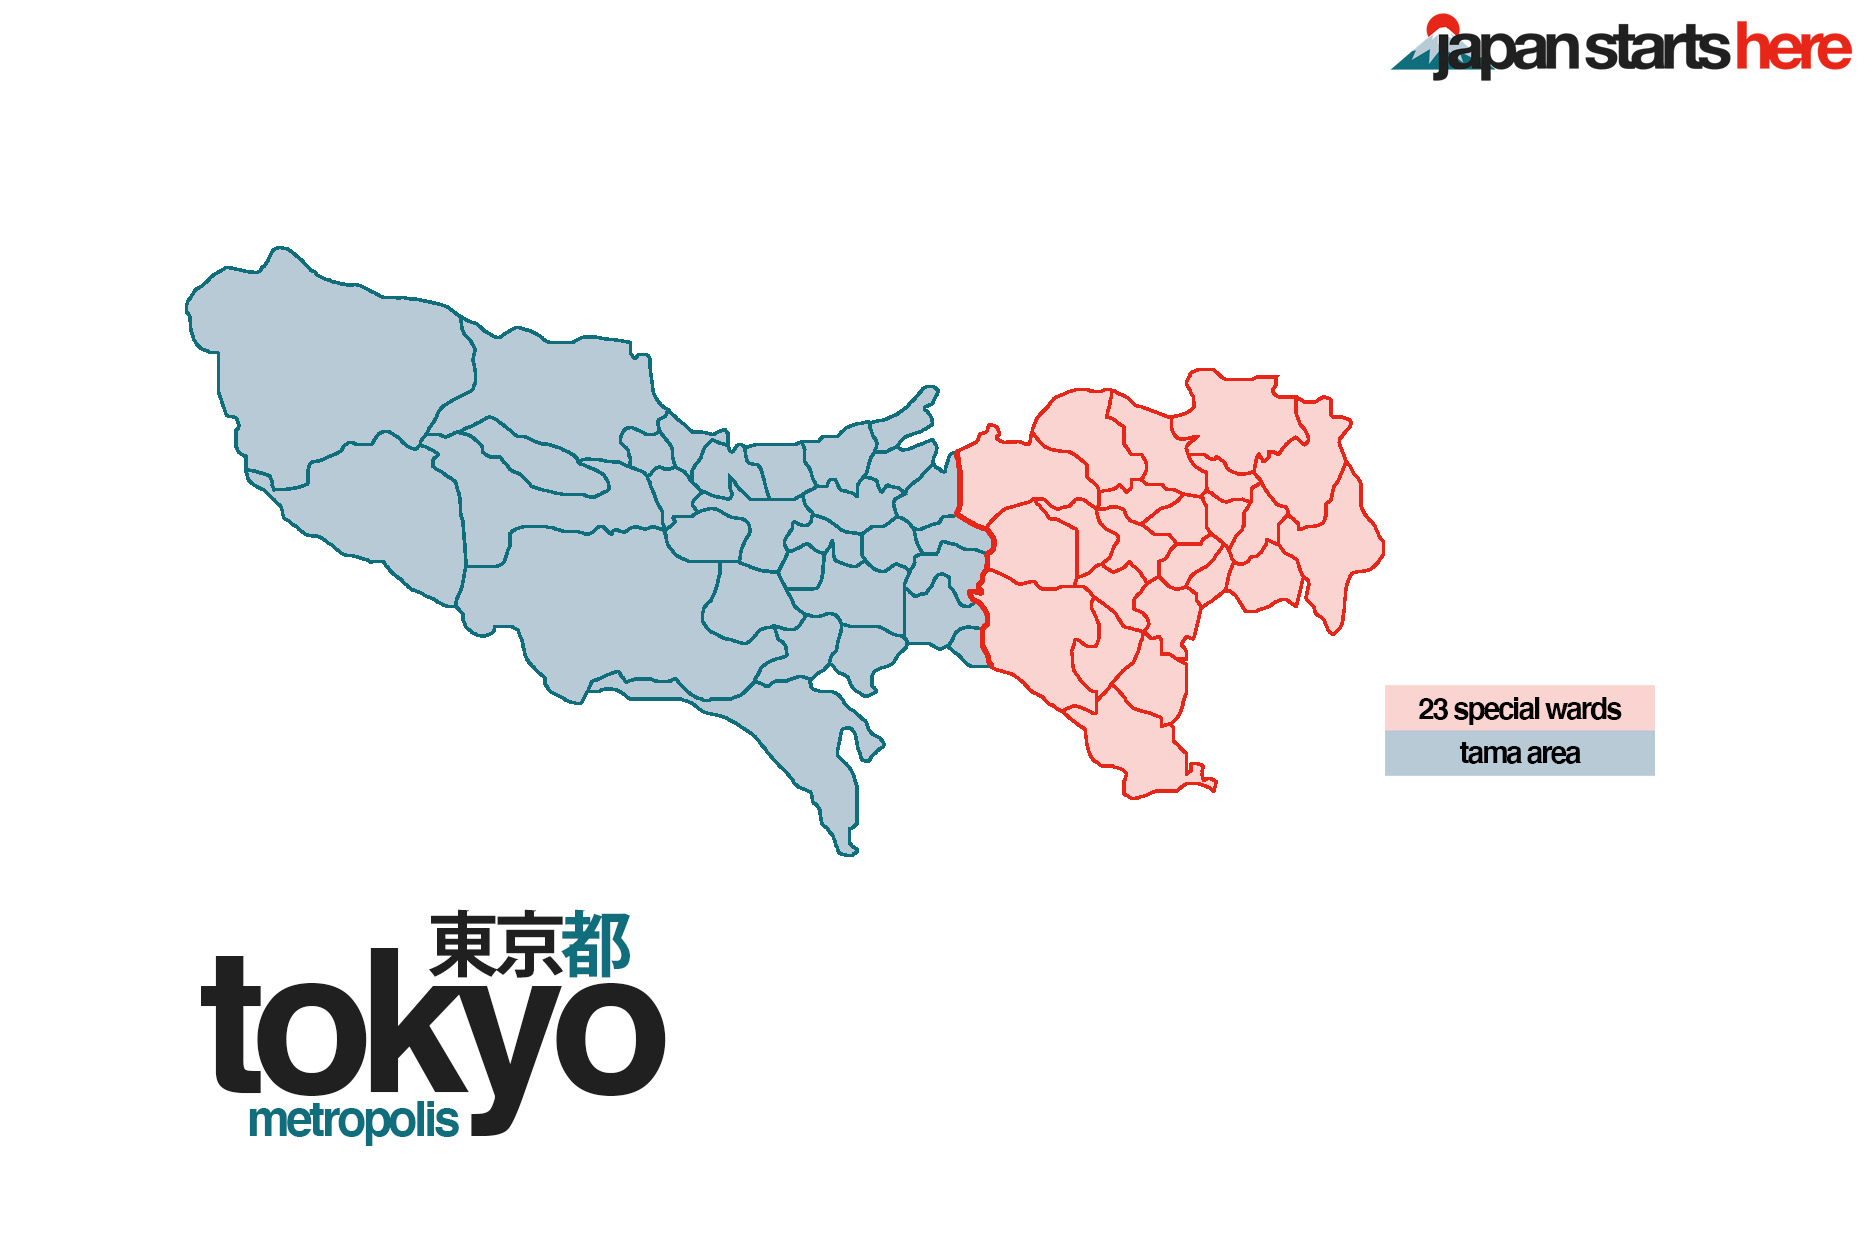 Ways to Make Sense of the Districts of Tokyo